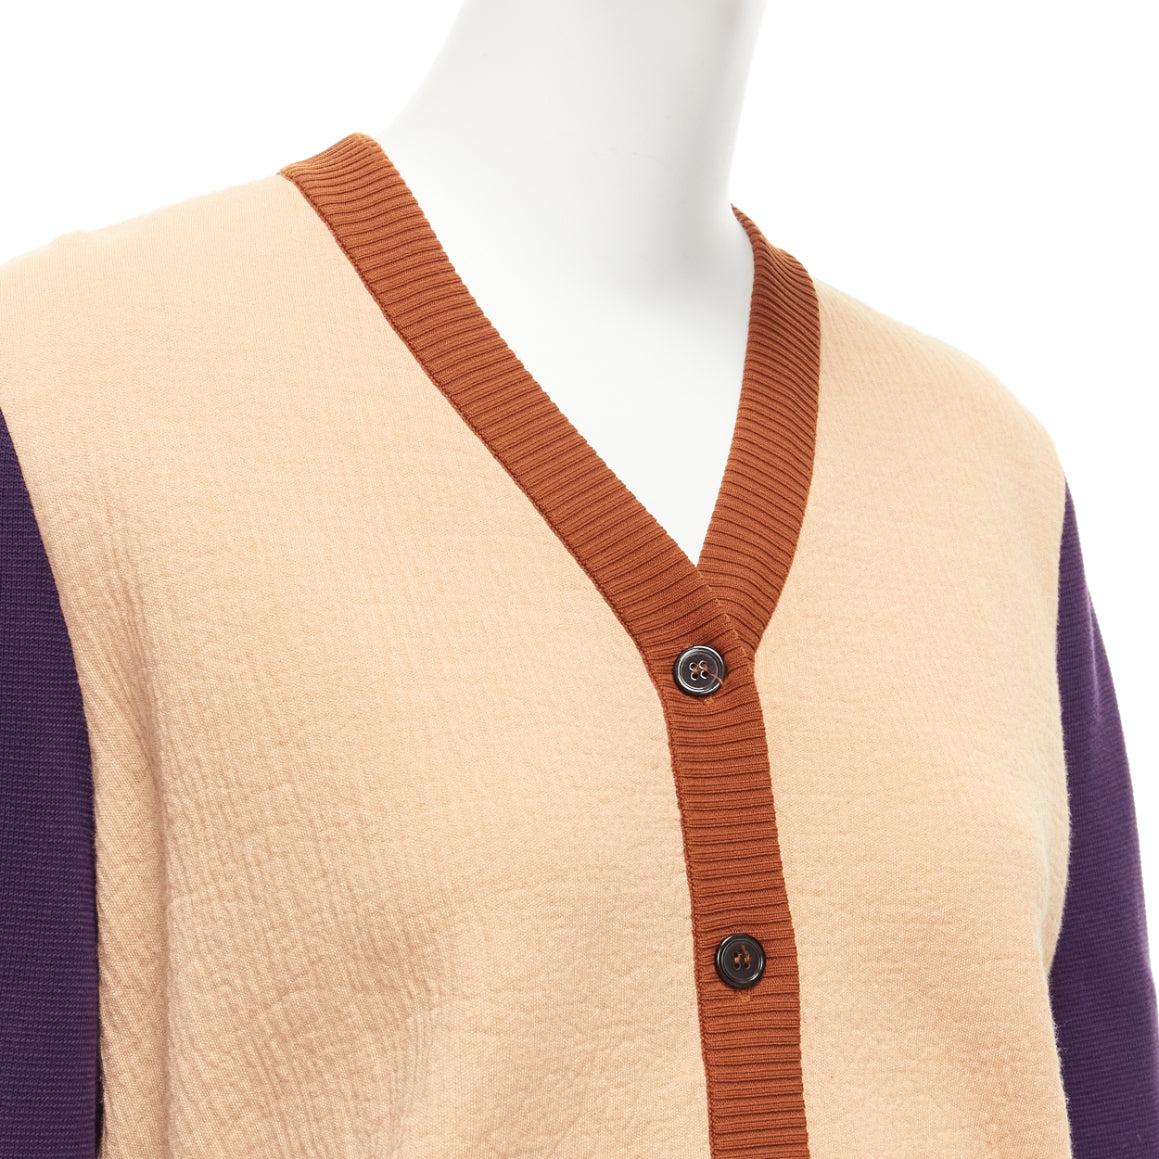 MARNI beige purple colorblocked mixed material cardigan sweater IT40 S For Sale 1